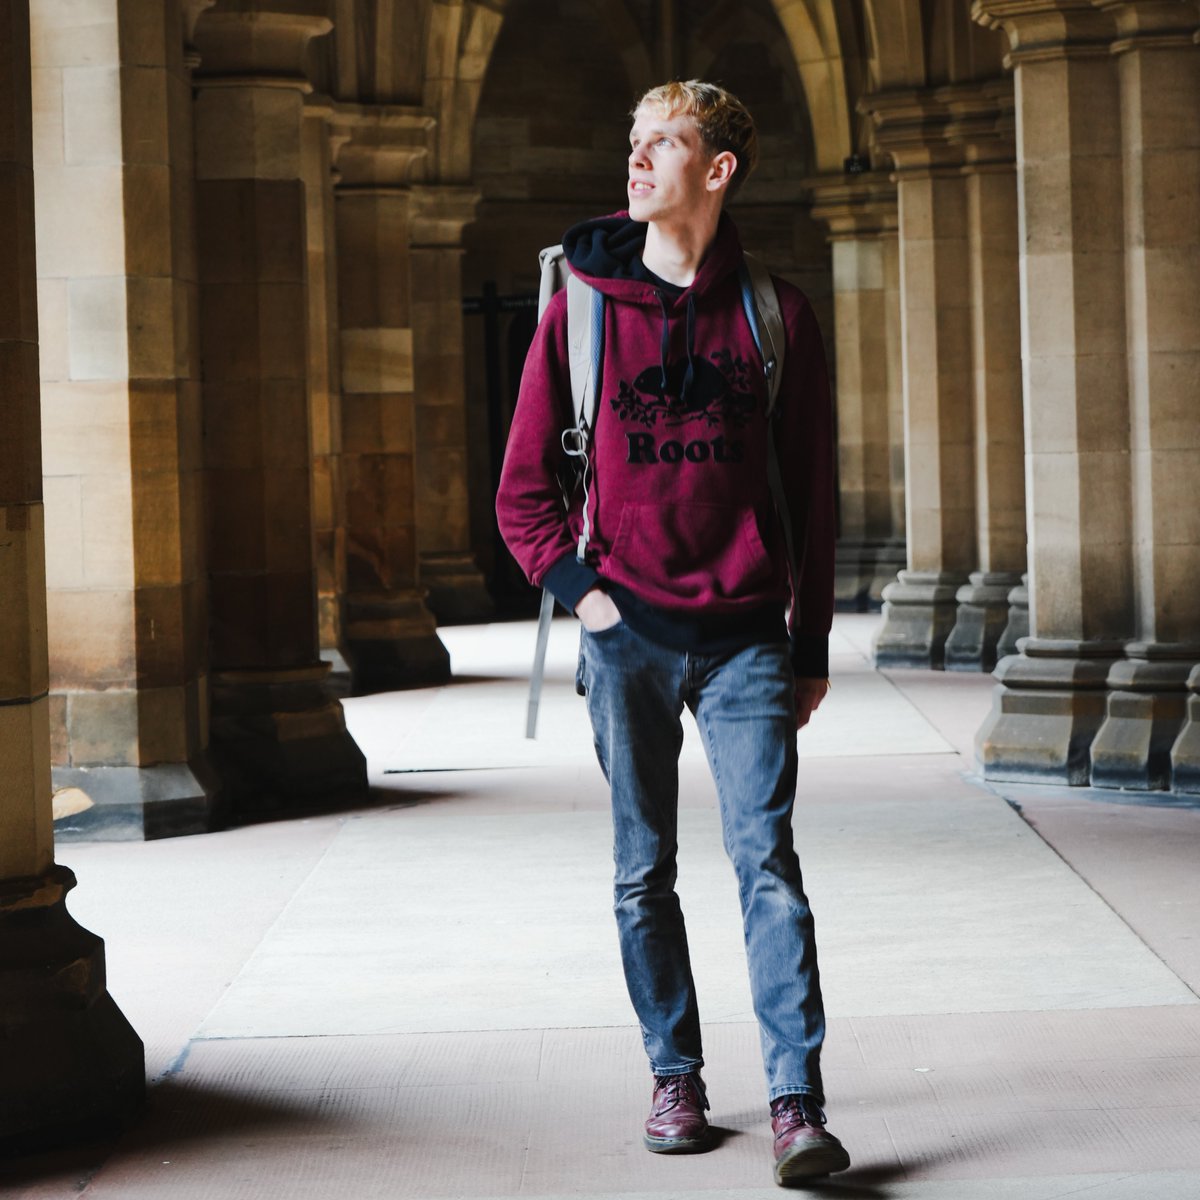 “It made my first experience of university one of respect, dignity & genuine excitement.

Jon had a challenging home life and became estranged from their parents as a teenager. With support from our @UofGWP team Jon became a UofG student.

More: 40faces.universities-scotland.ac.uk/money-matters/…

#40Faces